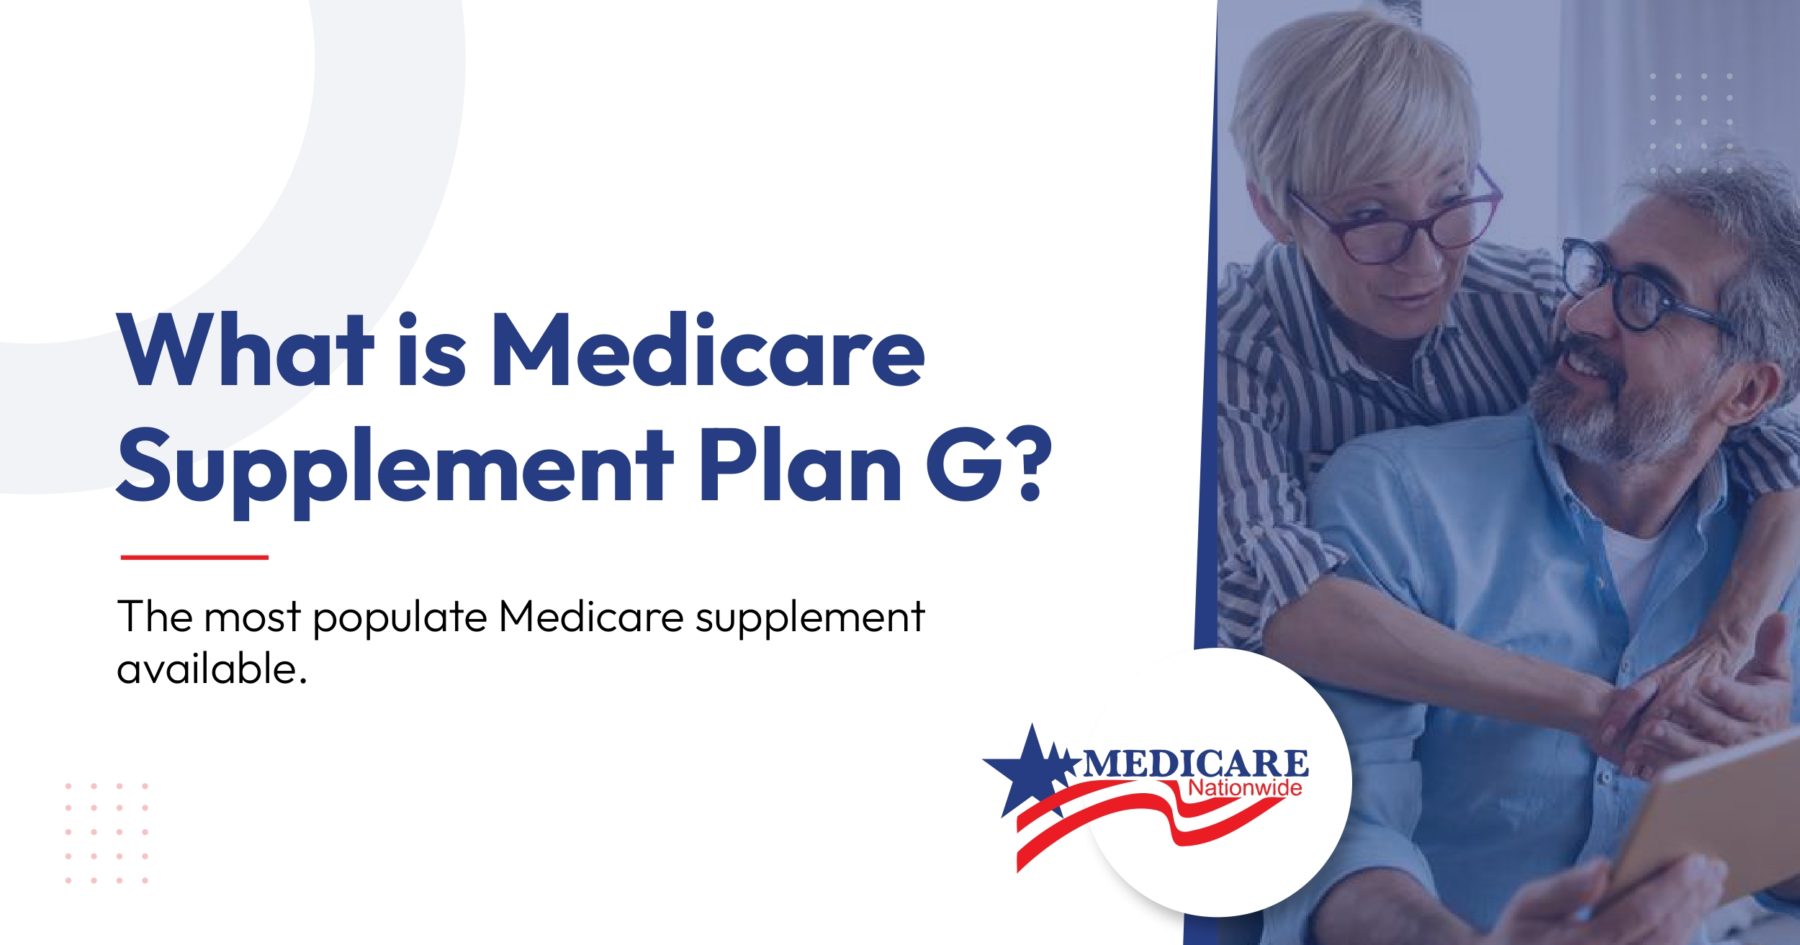 What is Medicare Supplement Plan G?